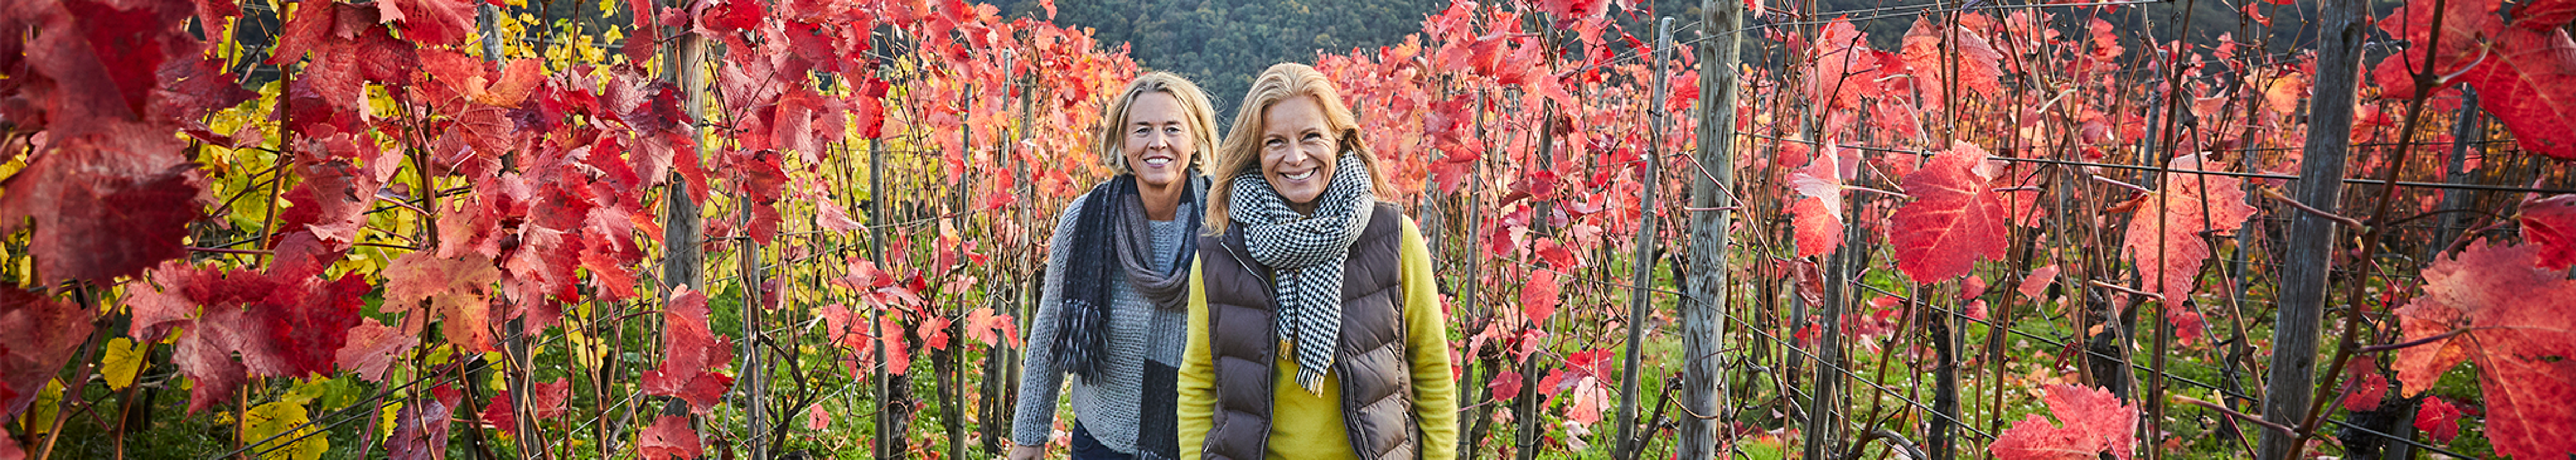 Two smiling women in their 50s who are eligible for a free mammogram, walking through a vineyard